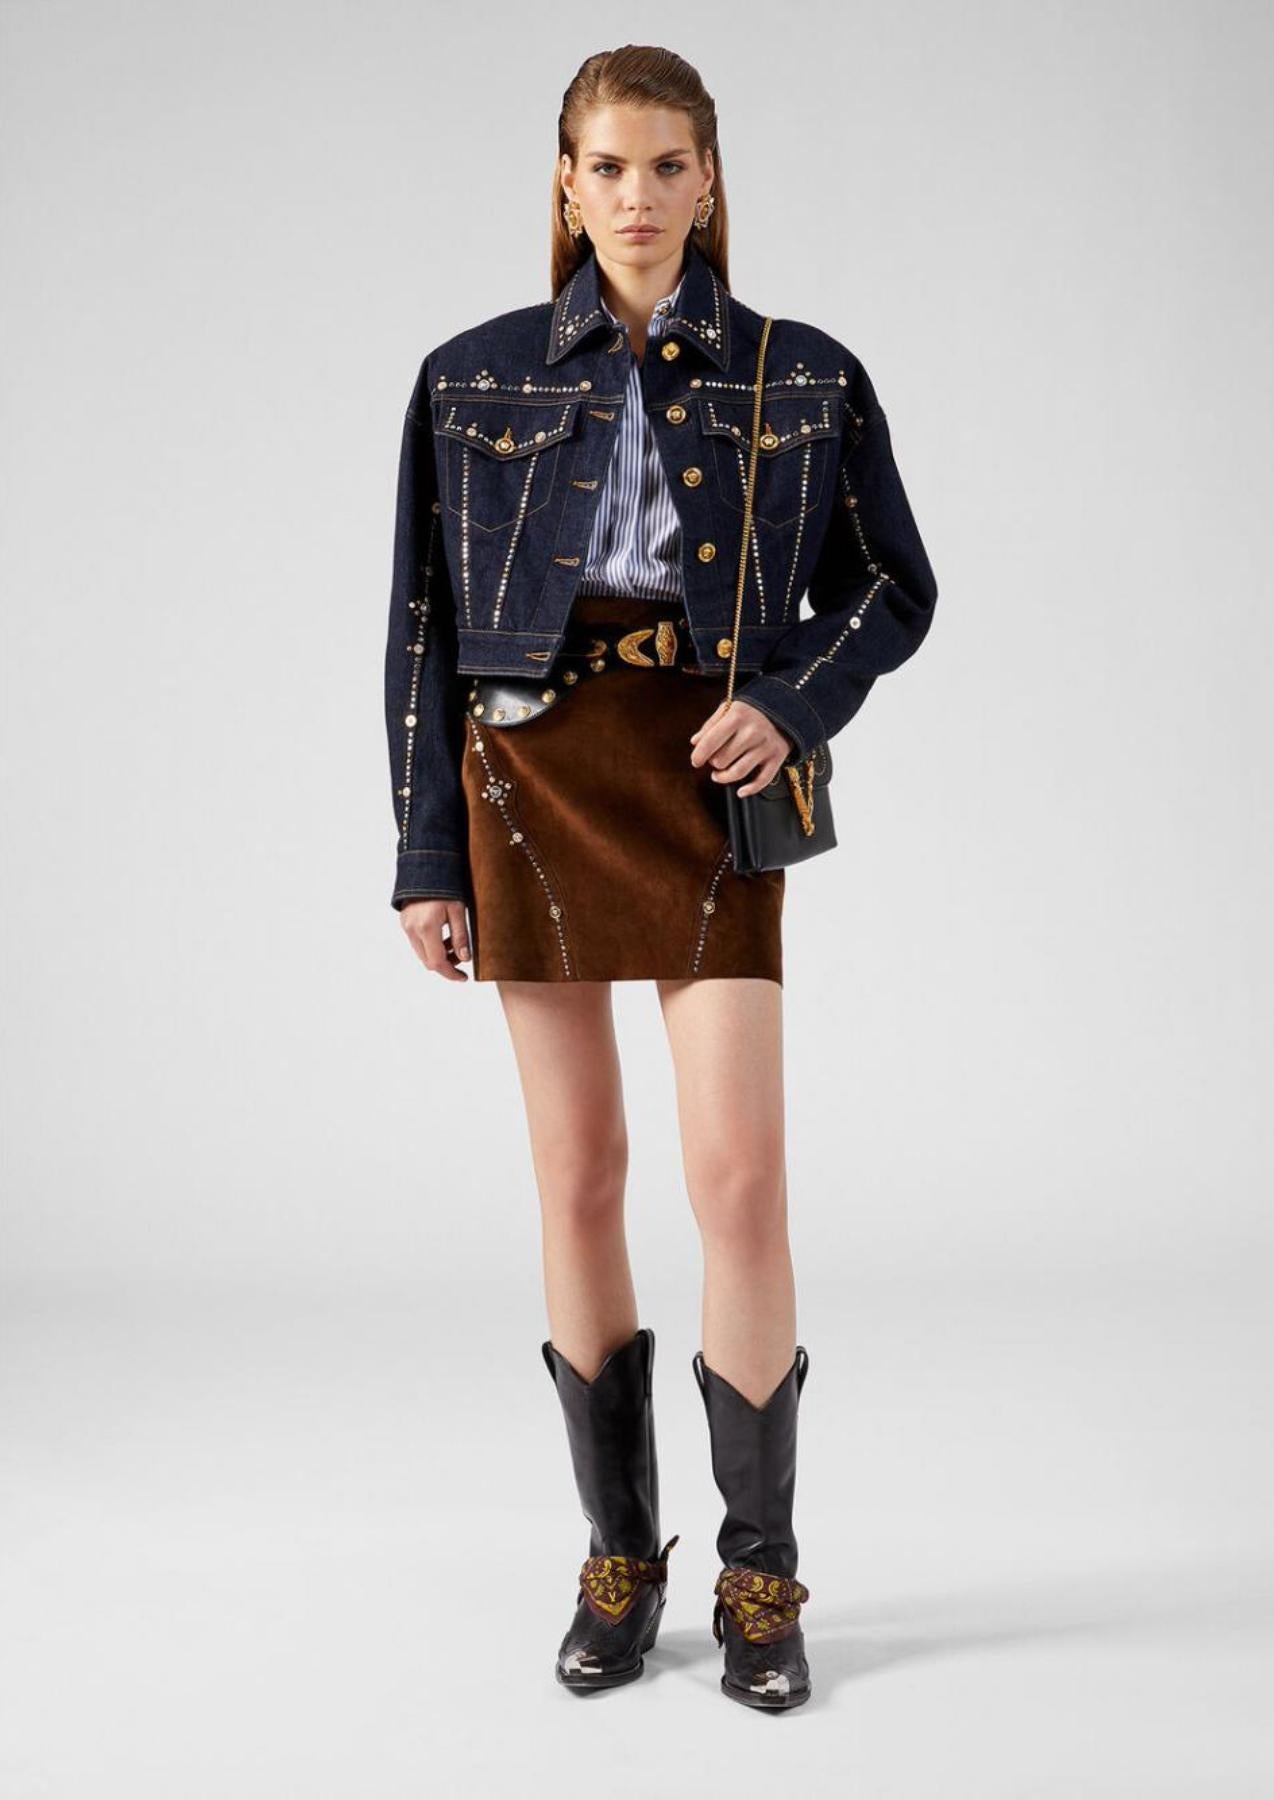 Versace Resort 2020 Studded Gianni Signature Dark Blue Denim Jean Jacket

Versace updates the traditional denim jacket silhouette. Crafted from dark blue stretch cotton, it presents silver- and gold-tone studs along the stitches and at the back,